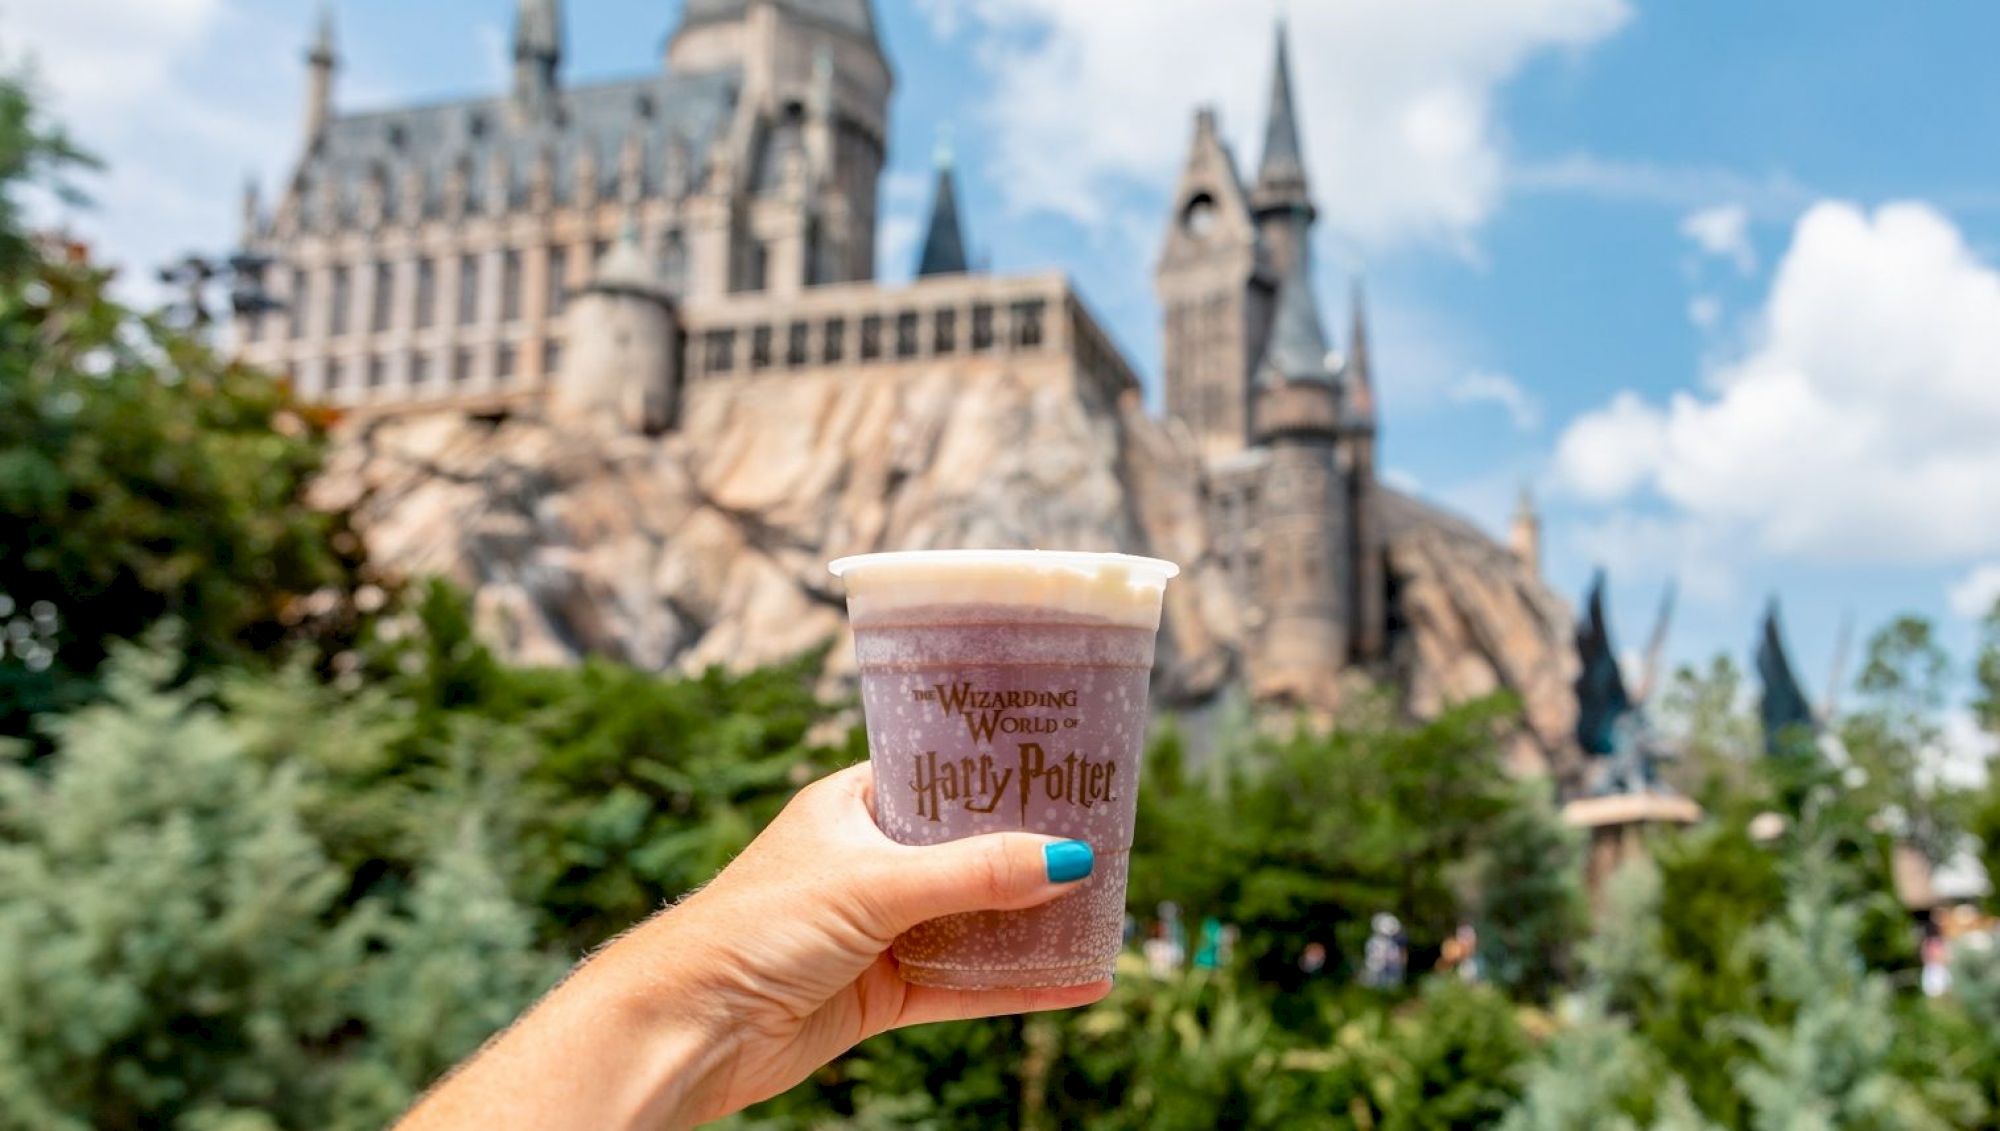 A hand holding a "Wizarding World of Harry Potter" branded drink, with a castle resembling Hogwarts in the background on a sunny day.